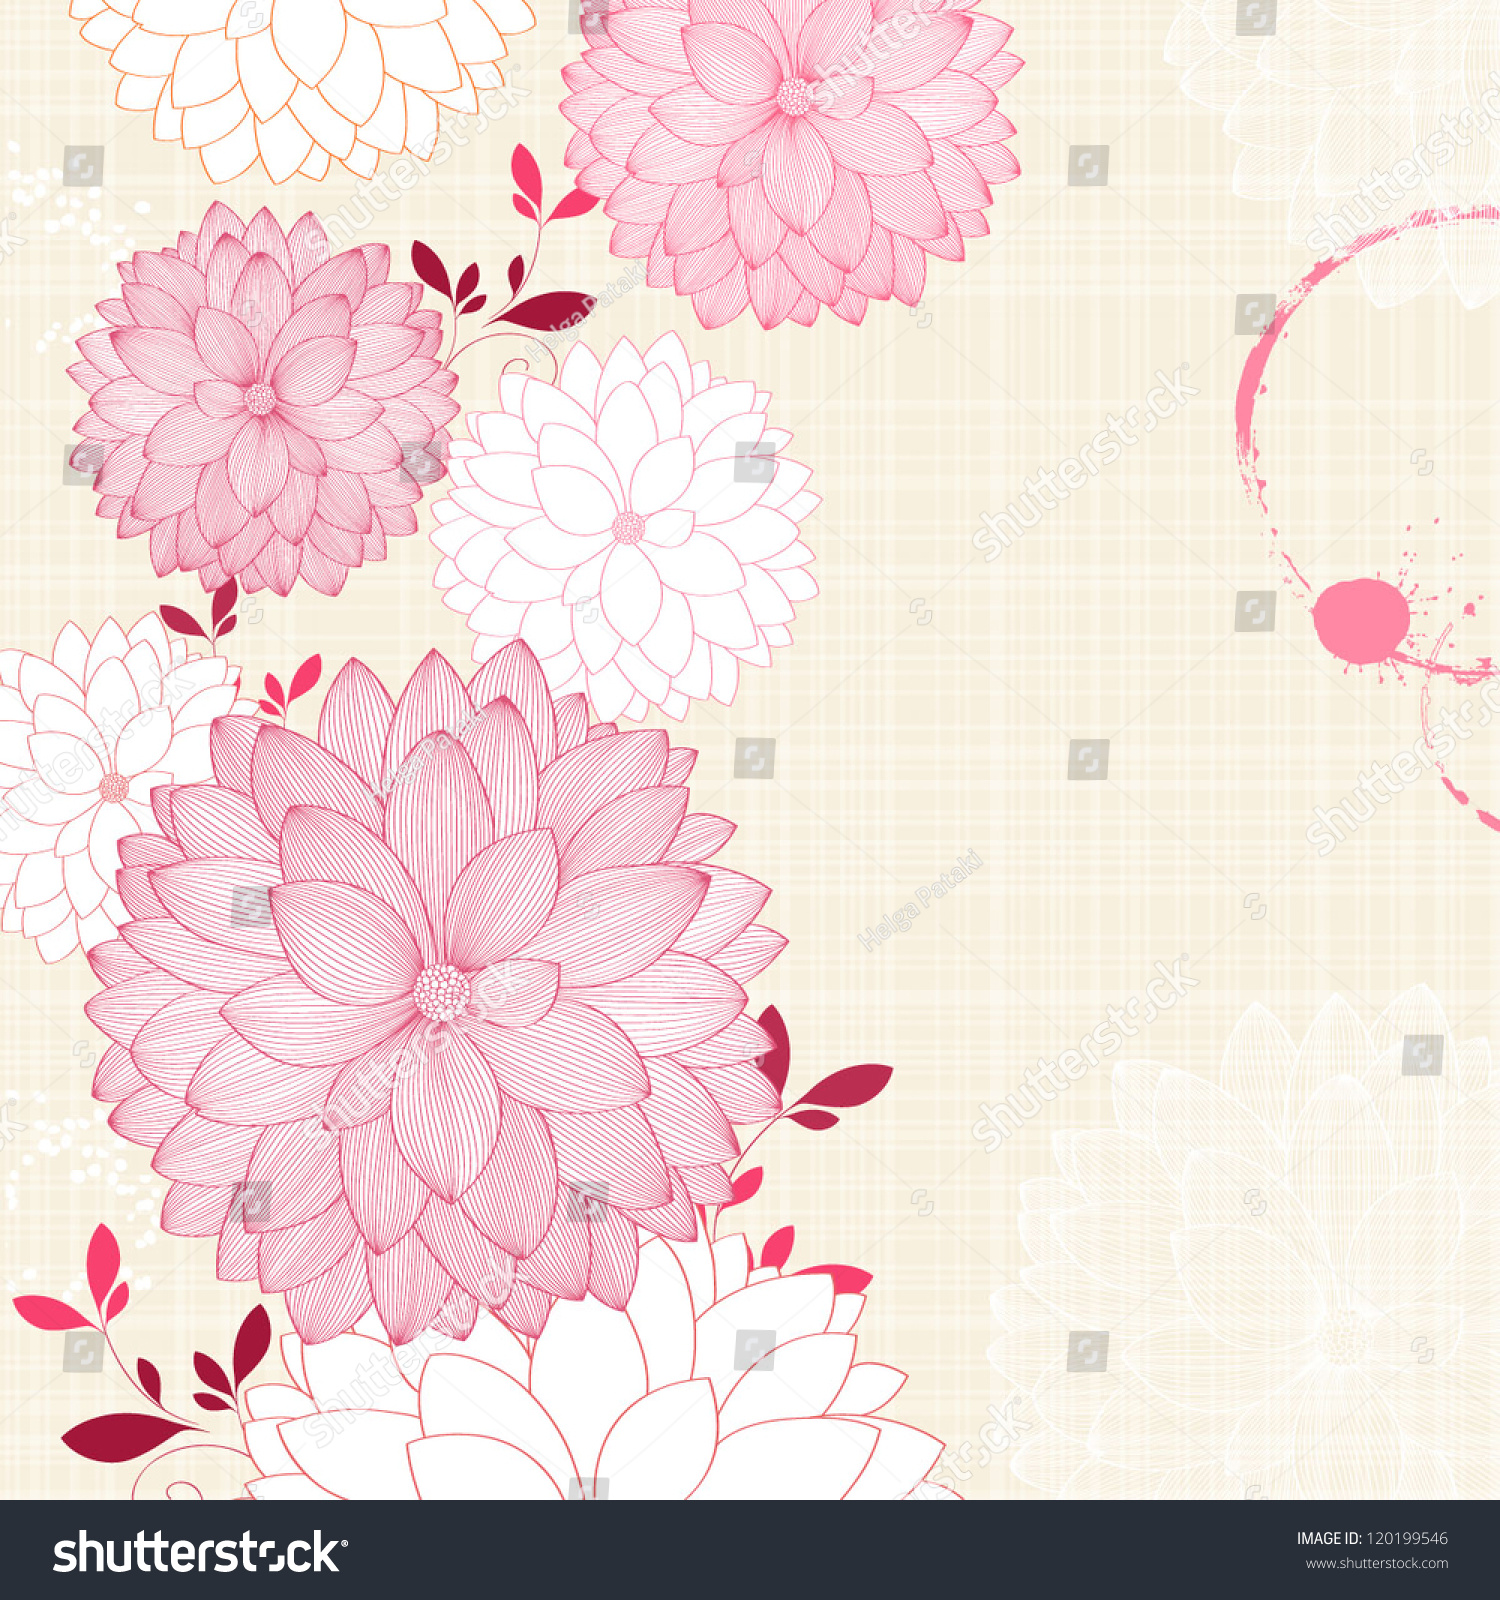 Floral Background With Flower Dahlia. Element For Design. Vector ...